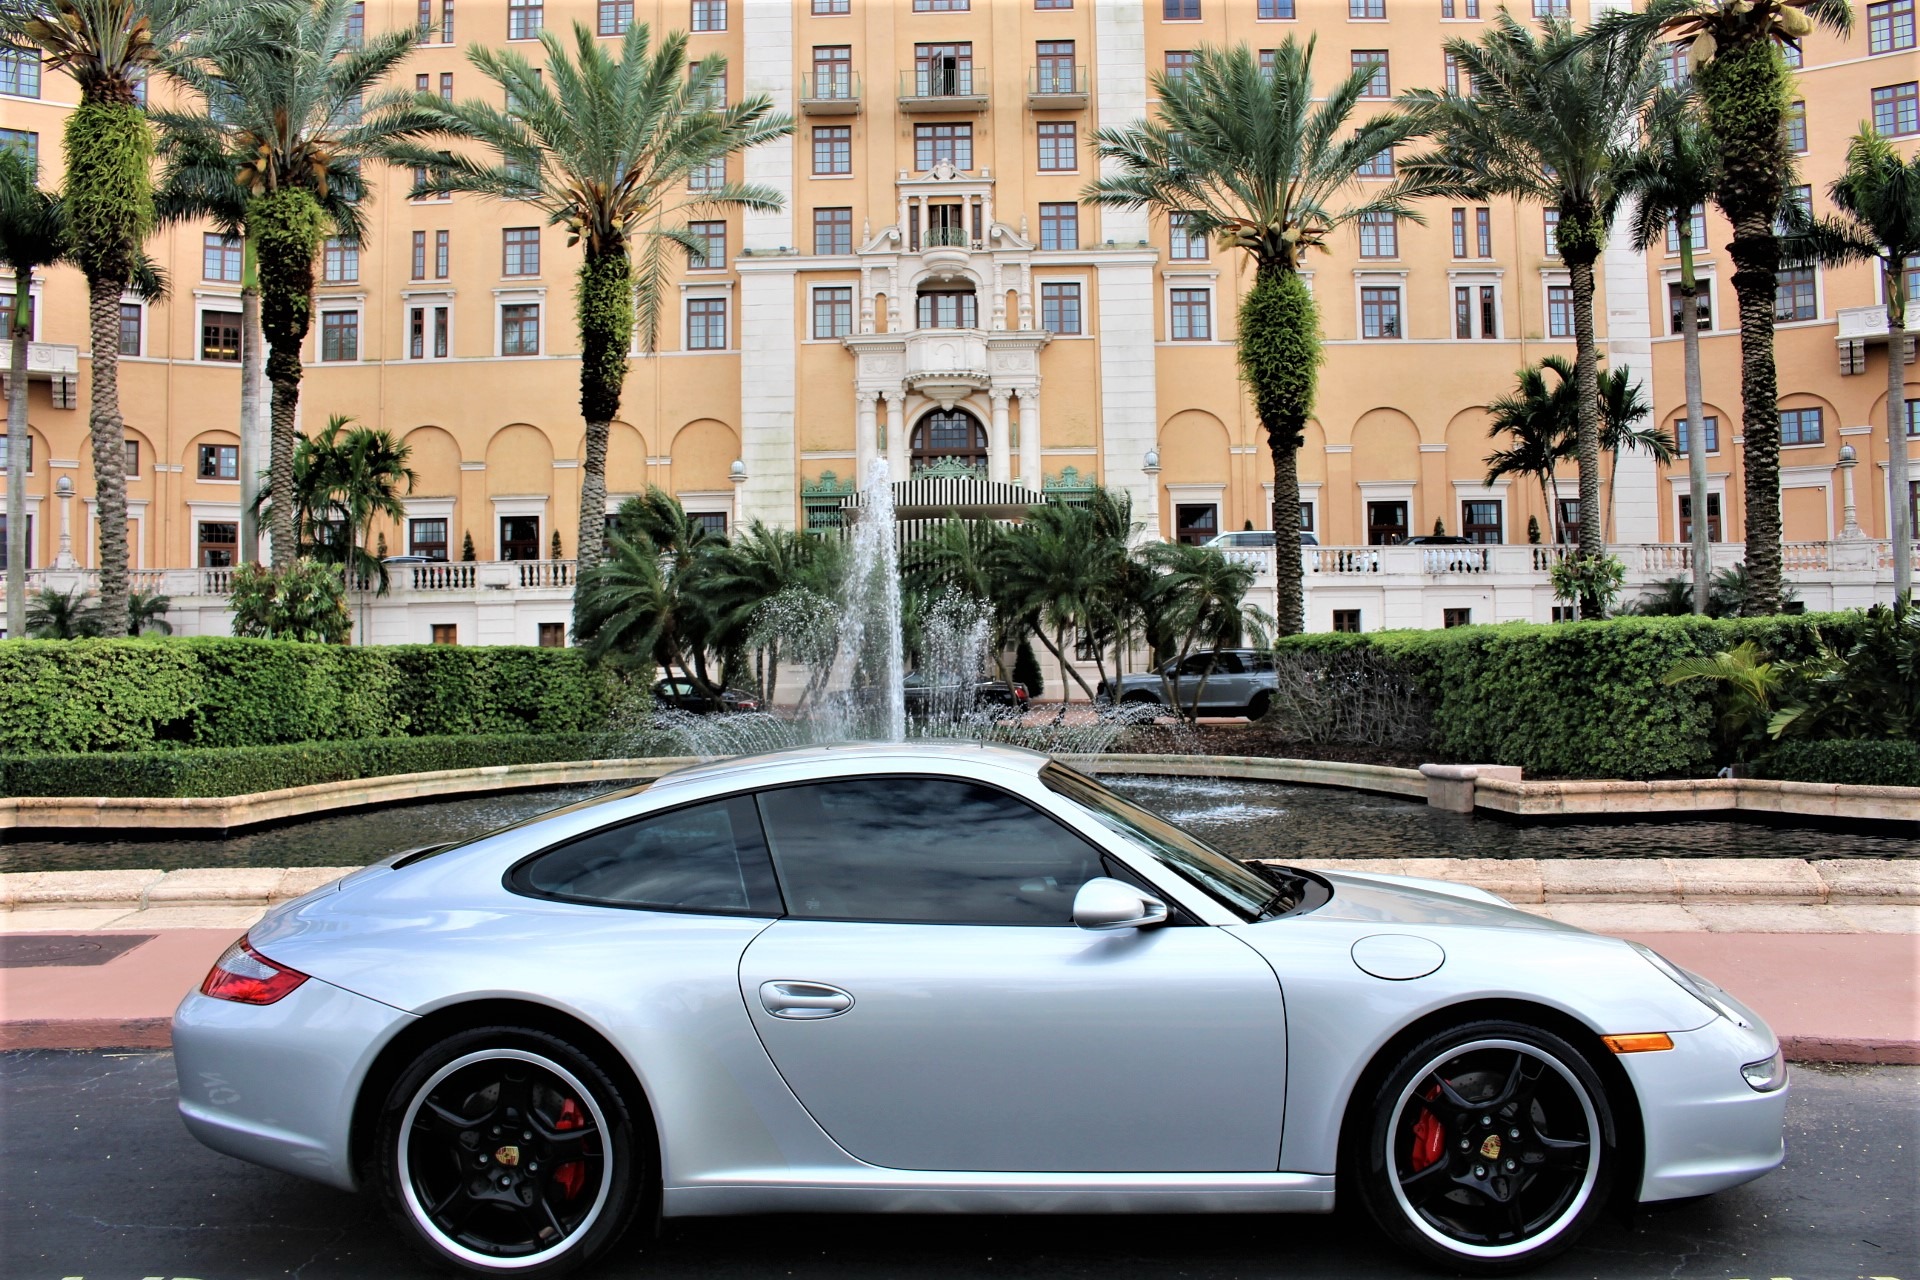 Used 2006 Porsche 911 Carrera S for sale Sold at The Gables Sports Cars in Miami FL 33146 1